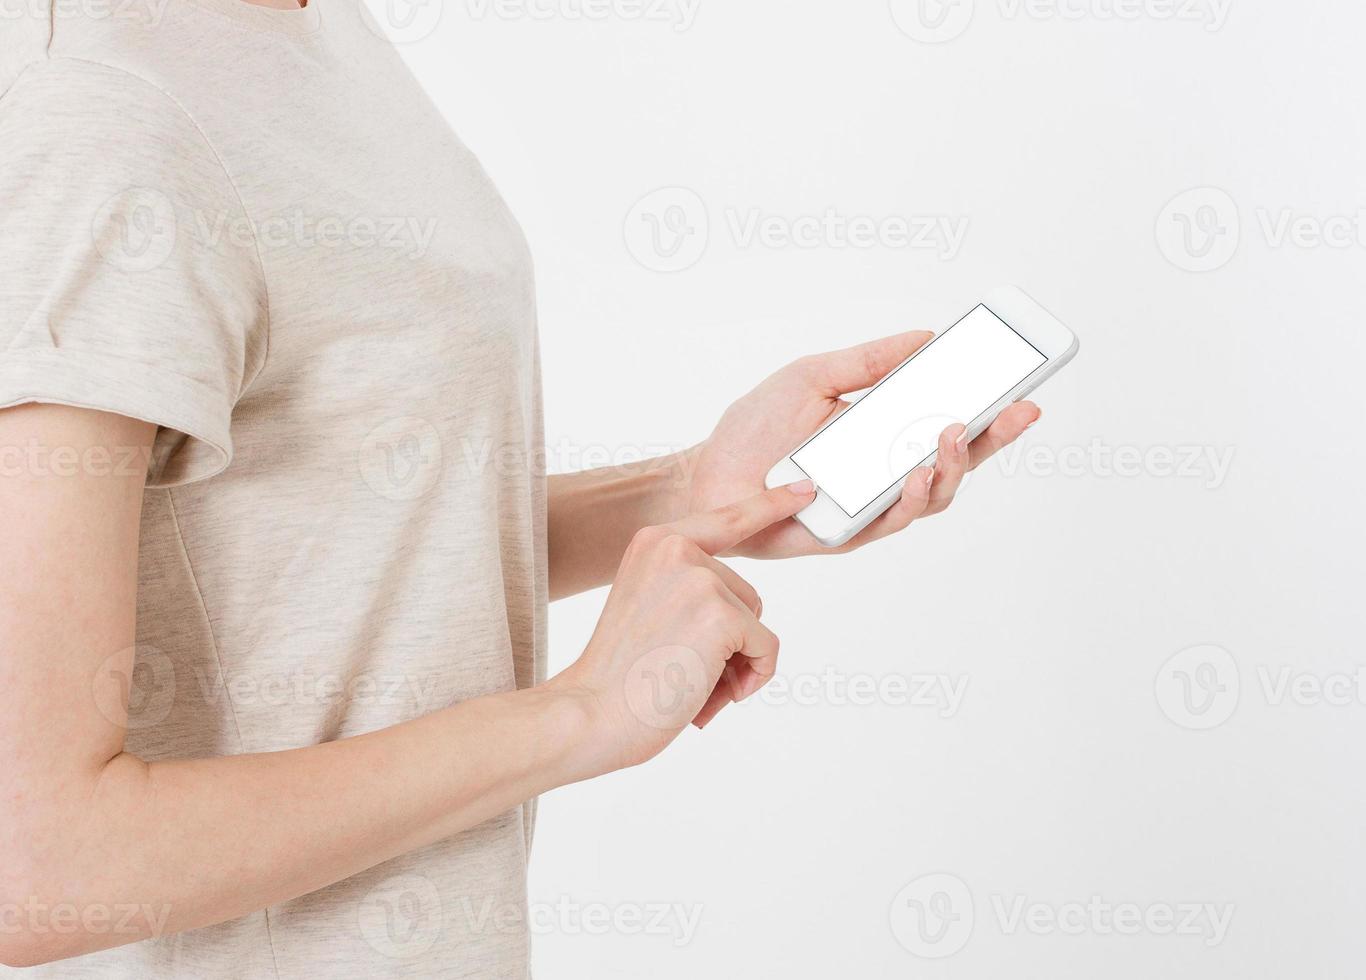 woman shows blank display of mobile phone, hand points to device, blank screen cellular photo